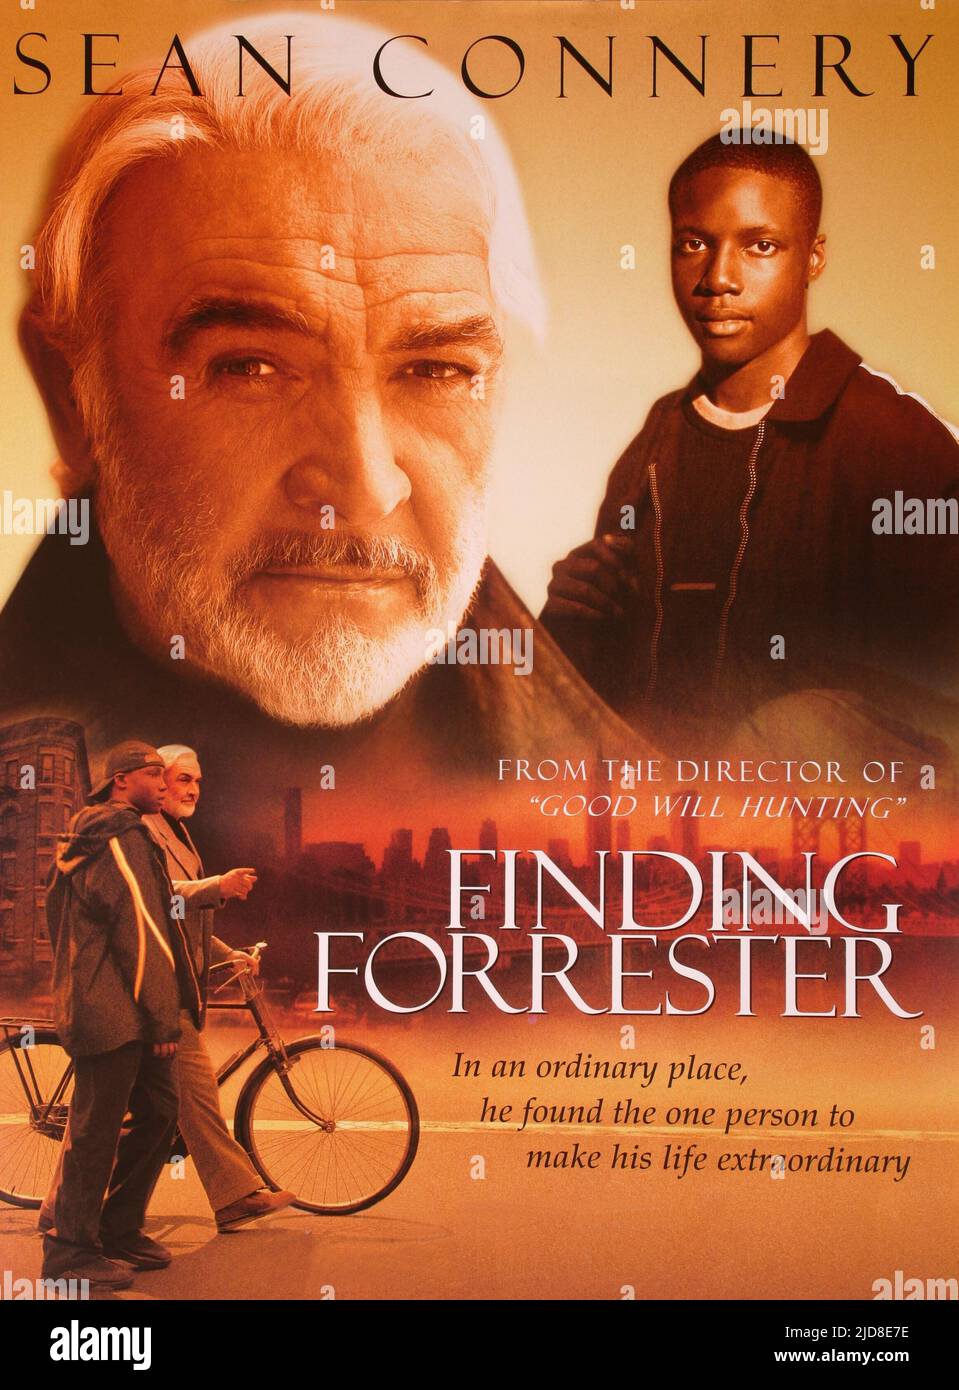 CONNERY,POSTER, FINDING FORRESTER, 2000, Stock Photo